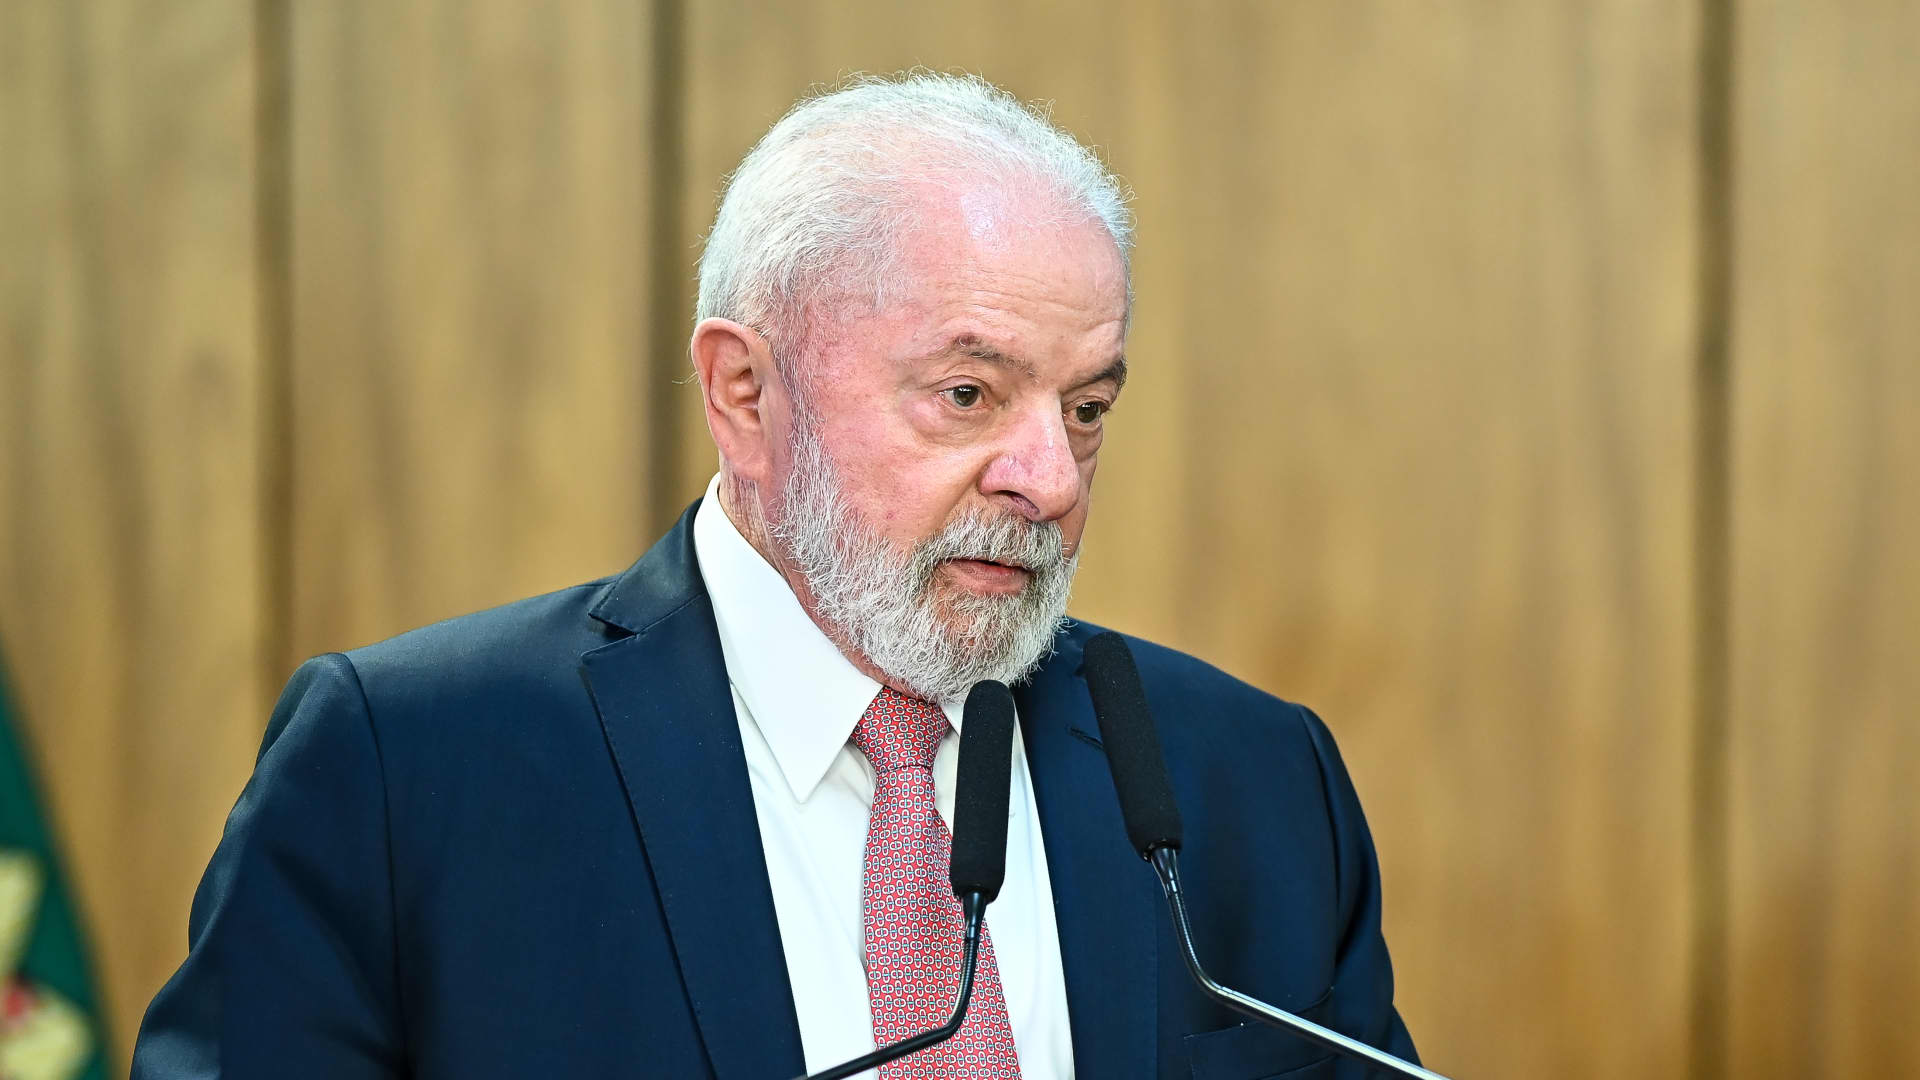 On Sept. 27, 2023, the President of Brazil, Luiz Inacio Lula da Silva, will take part in a ceremony at the Planalto Palace to sign the concession contracts resulting from the 1st Transmission Auction of 2023.